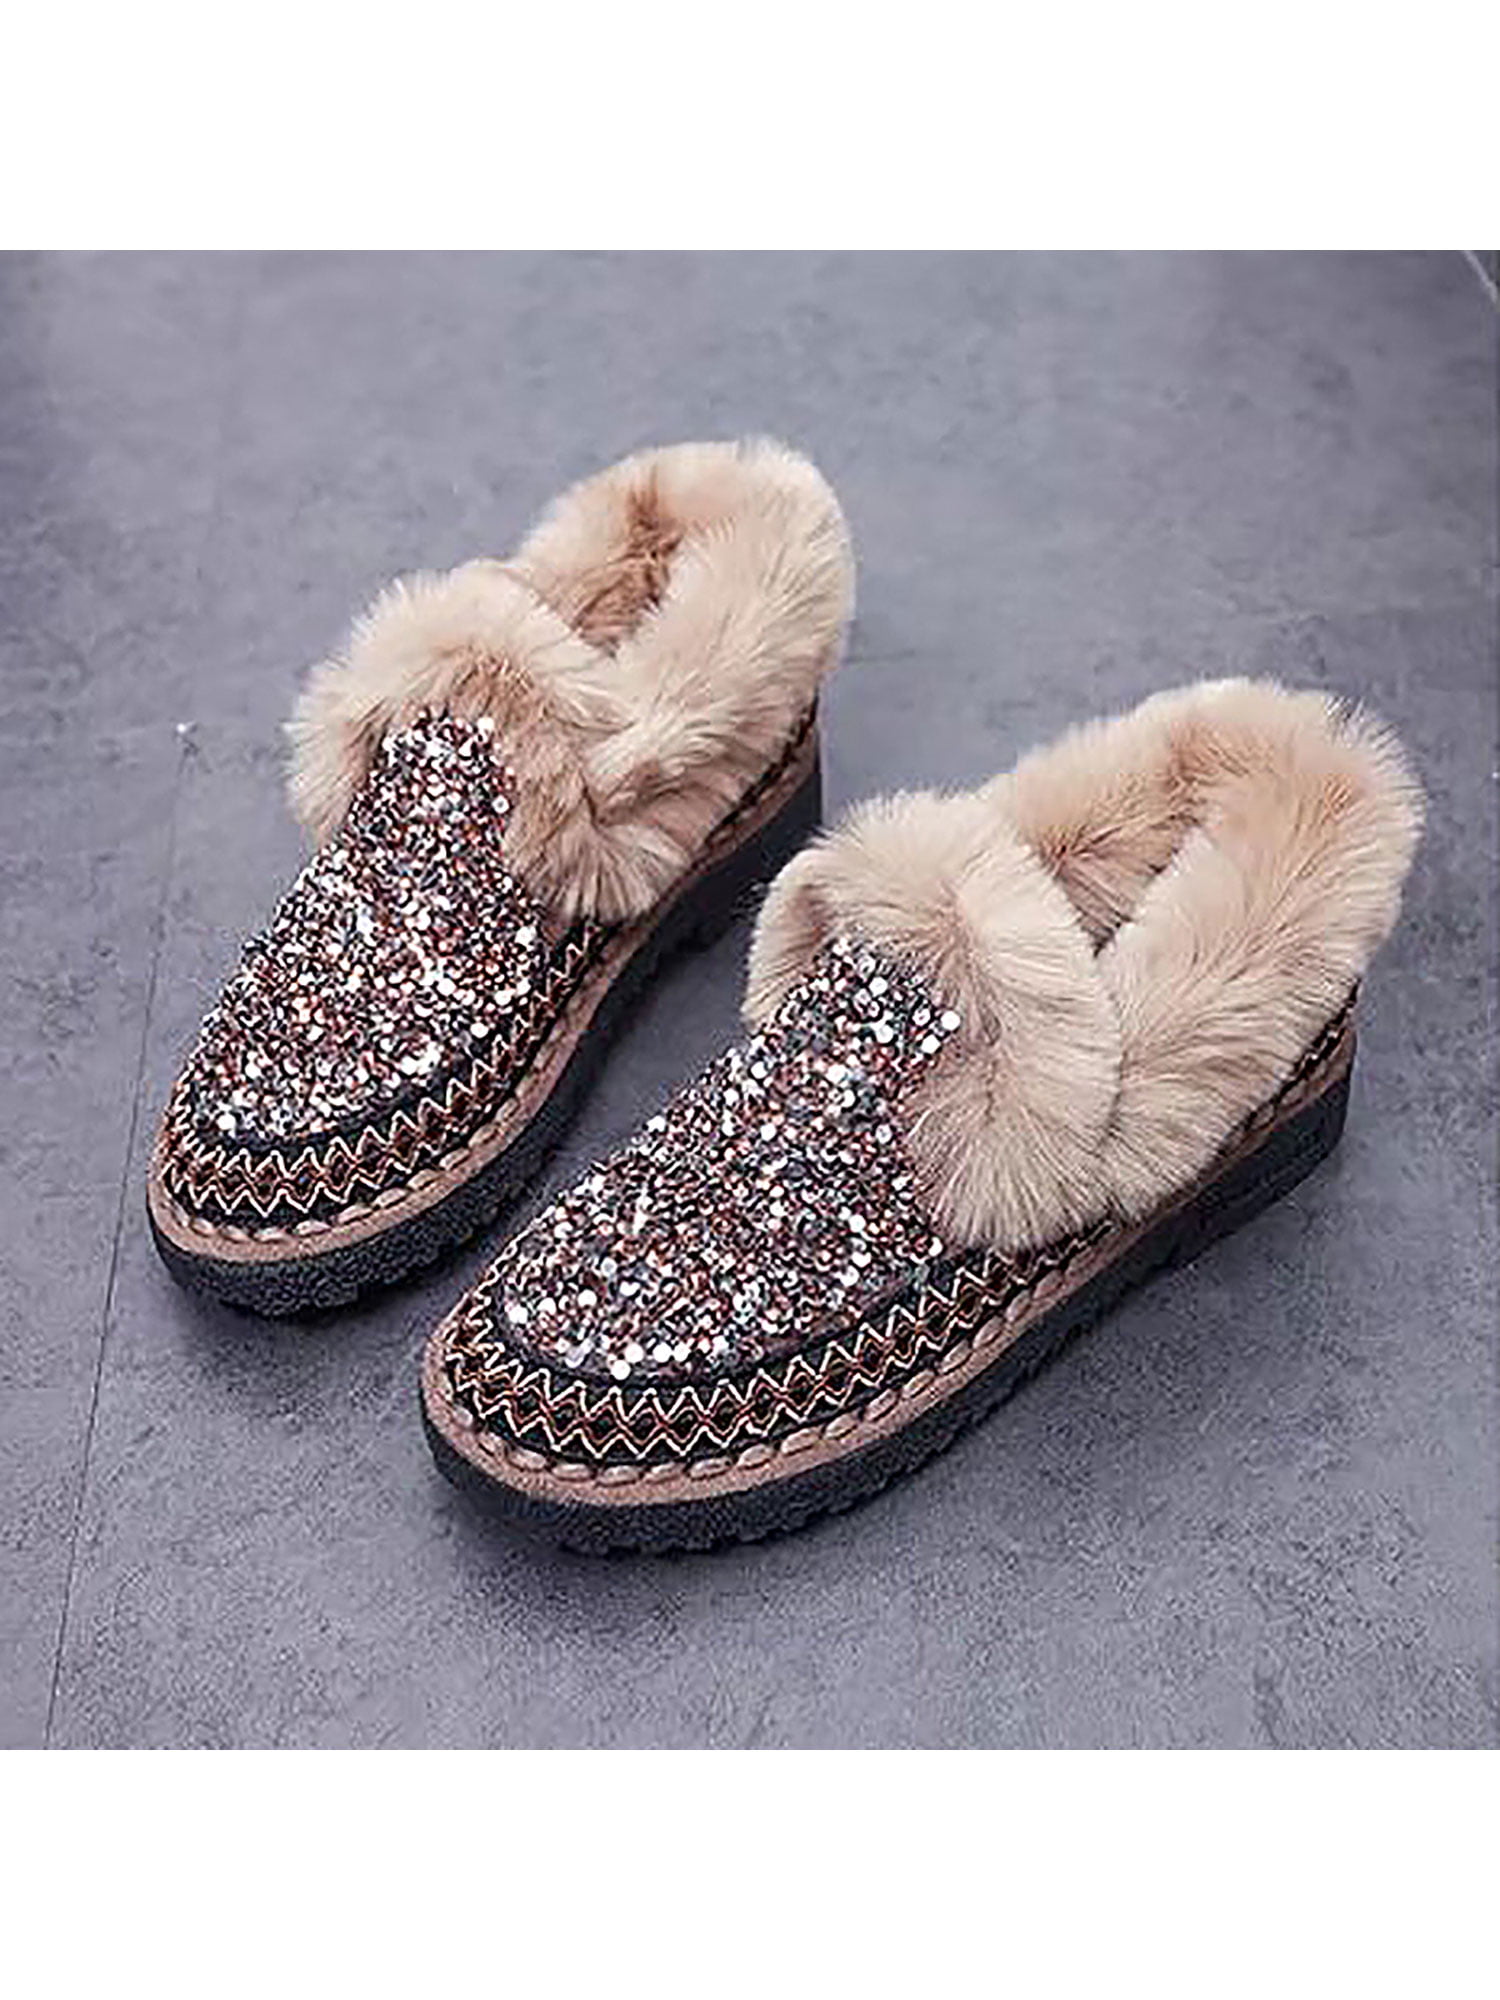 New Women's Moccasin Flats Warm Soft Fur Lined Bow Stitch Loafer Slipper Shoes 